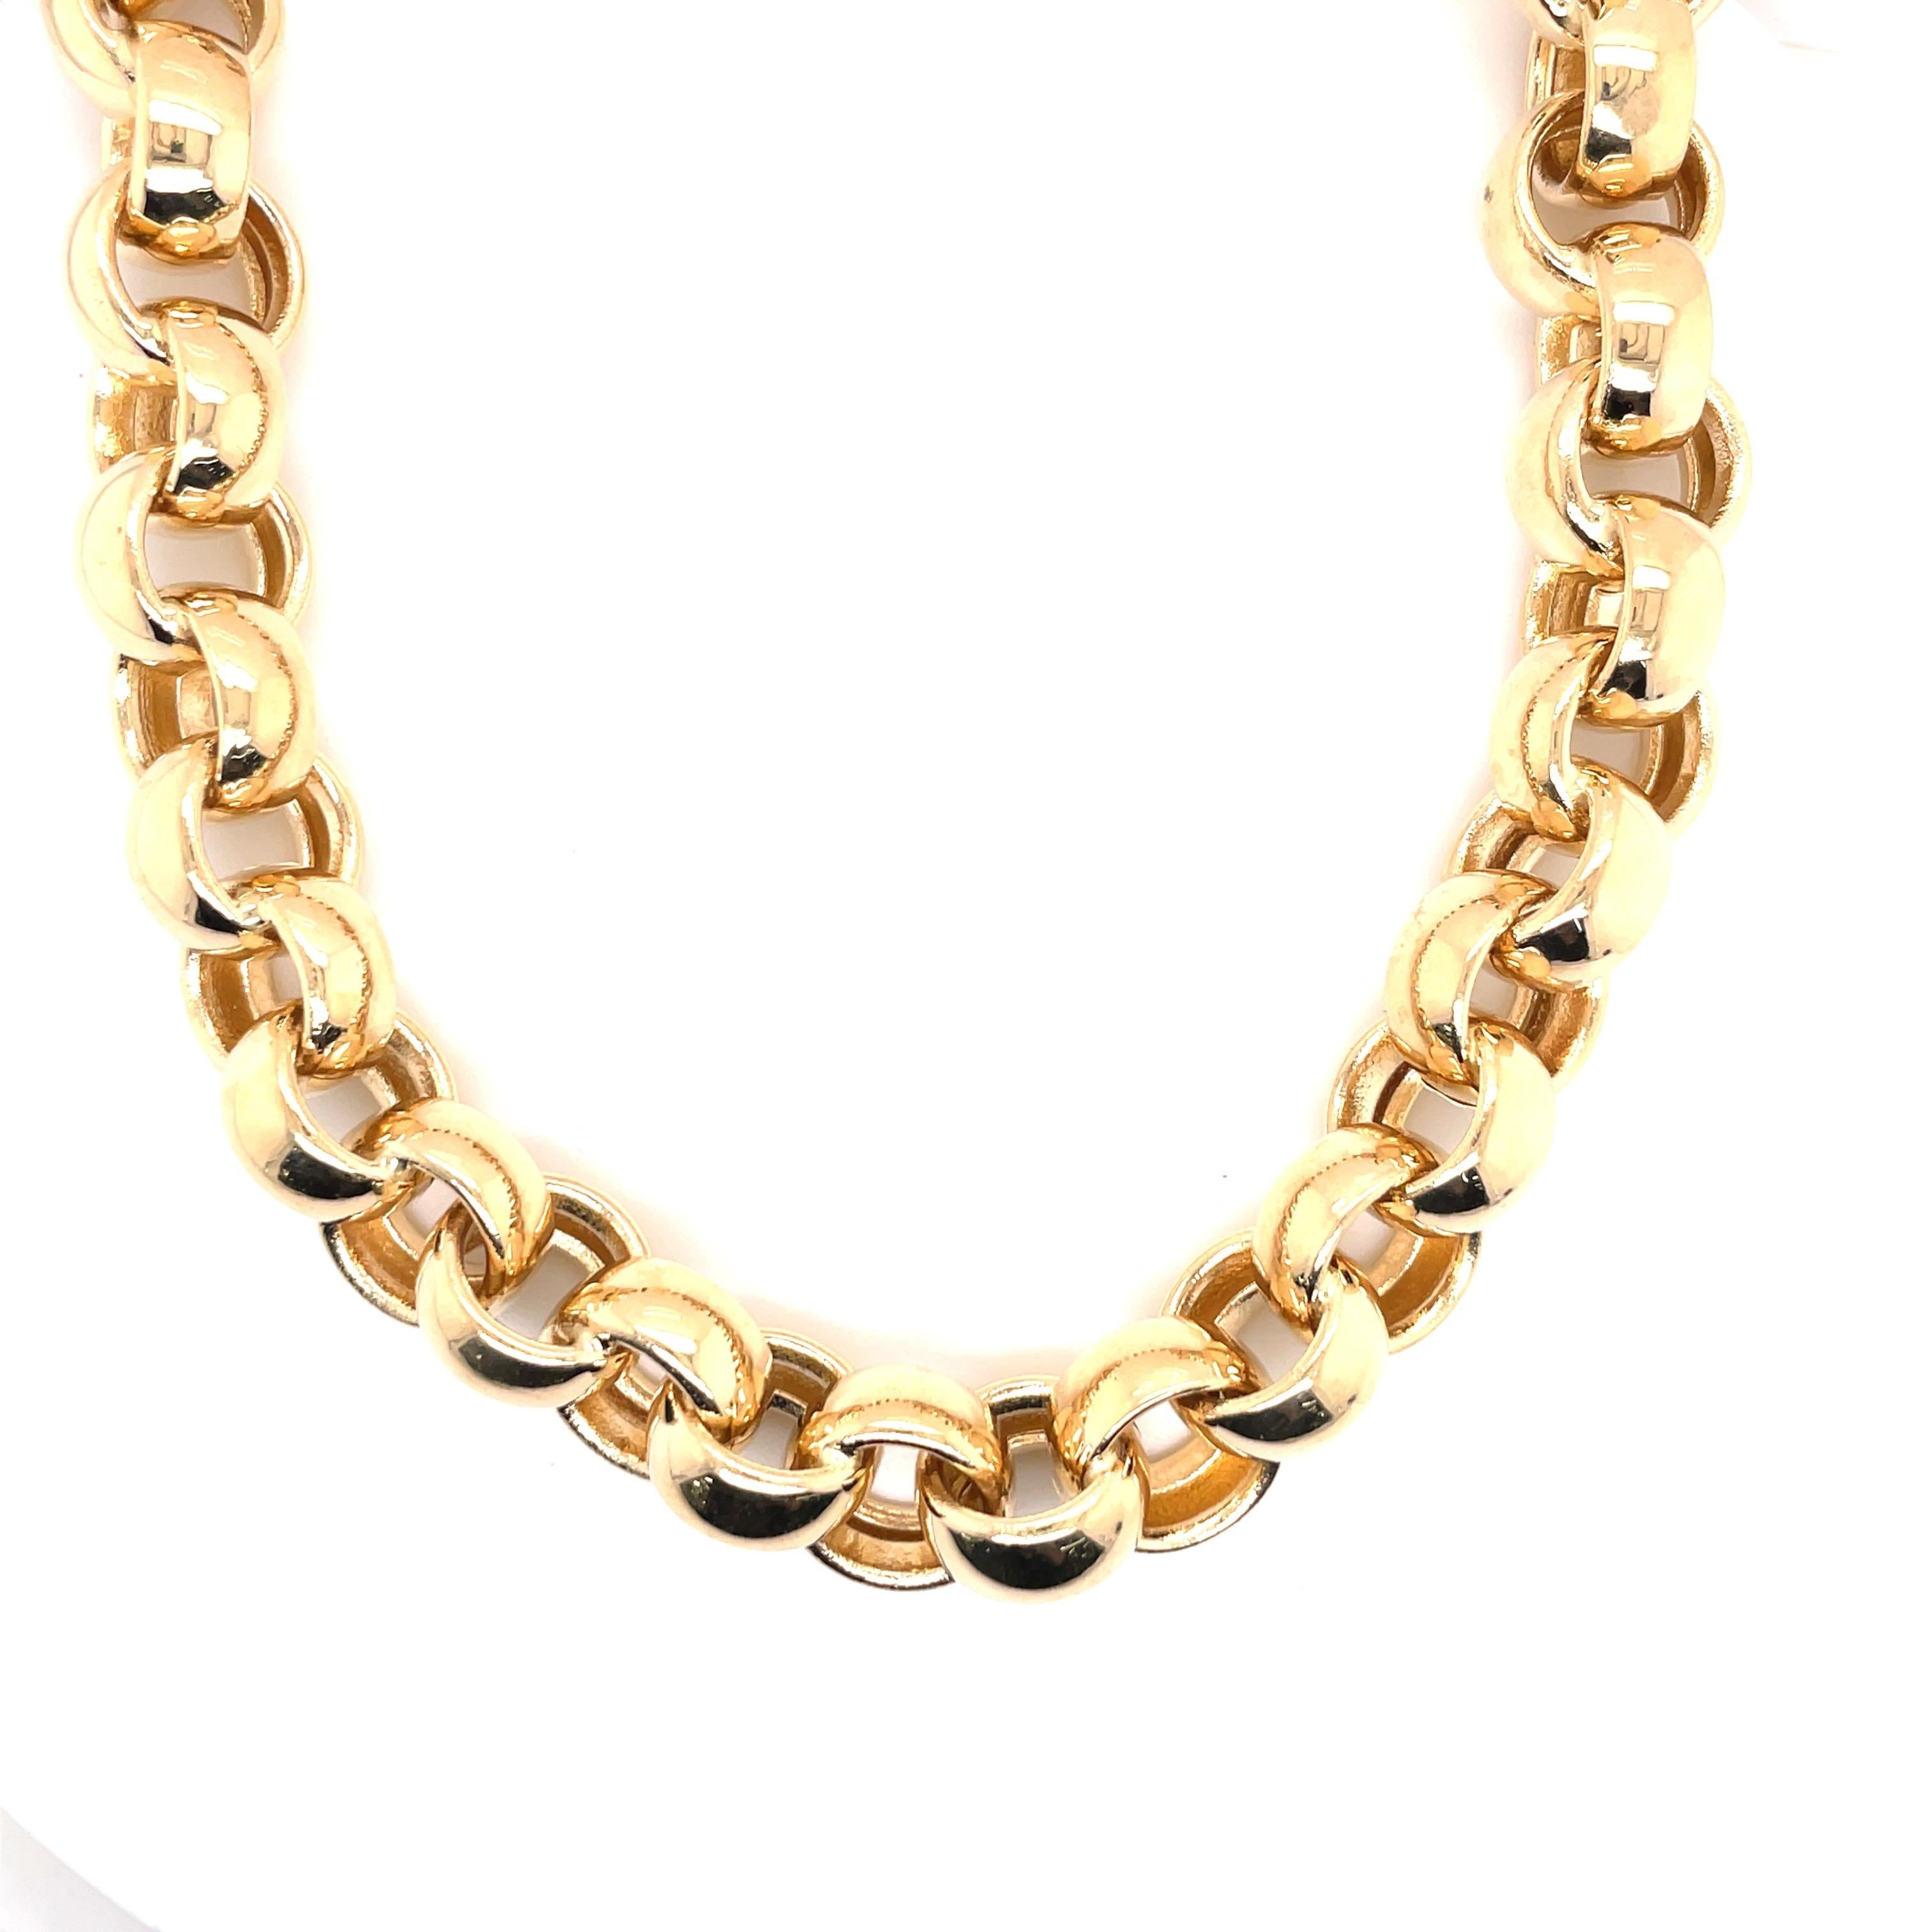 Contemporary 14 Karat Yellow Gold Link Necklace Made in Turkey 62.2 Grams For Sale